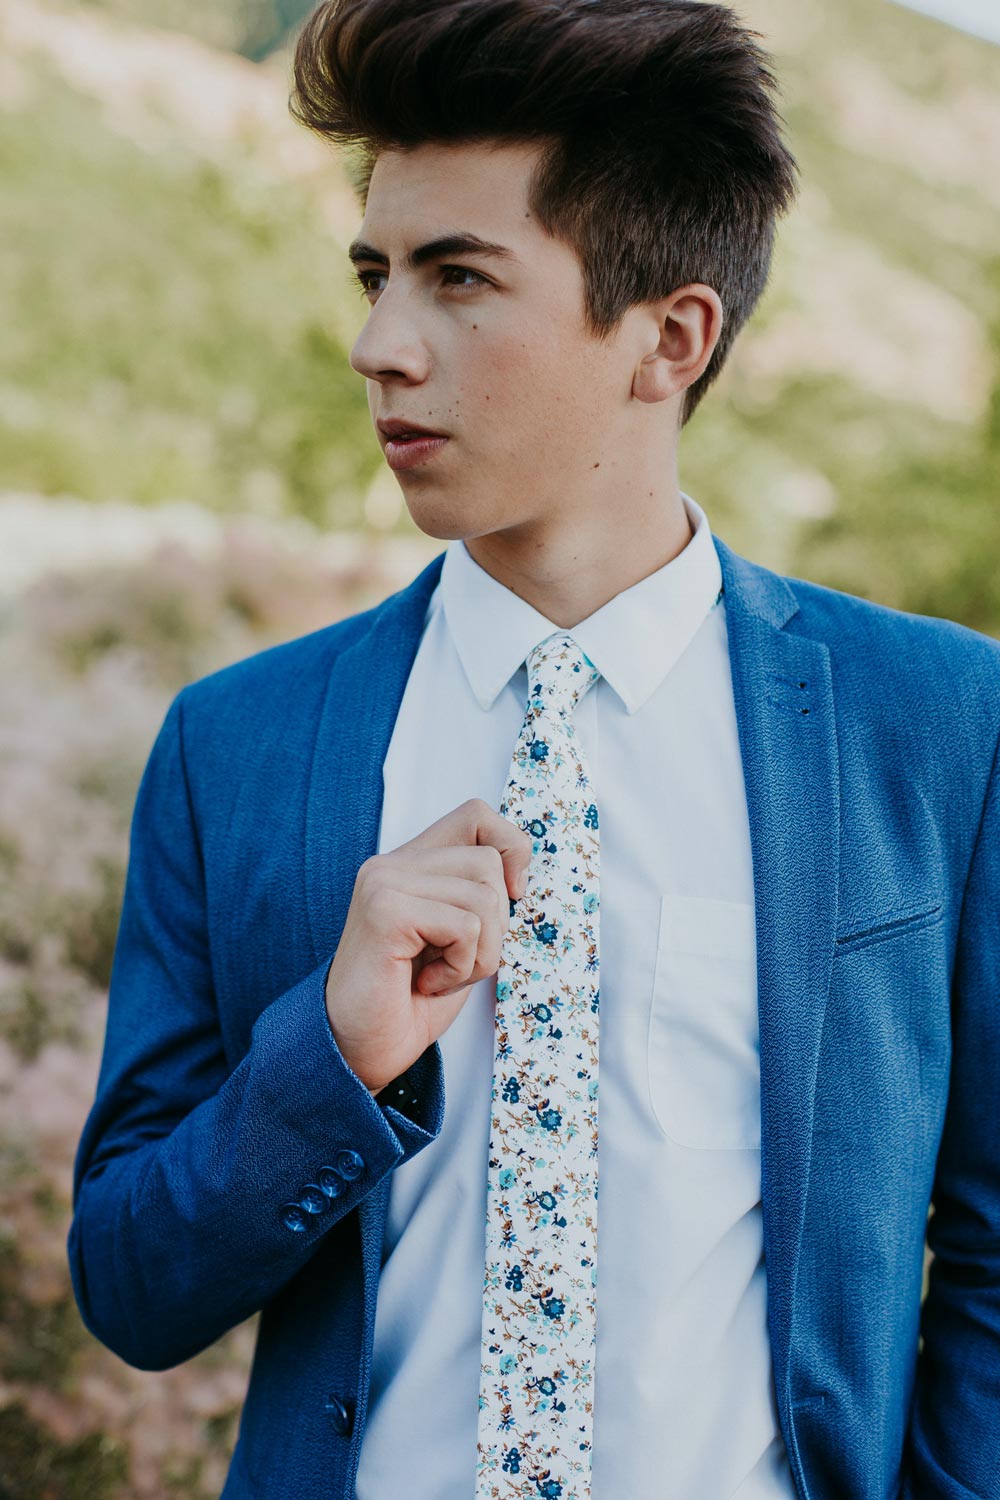 Blue Bloom tie worn with a white shirt and navy blue suit jacket.